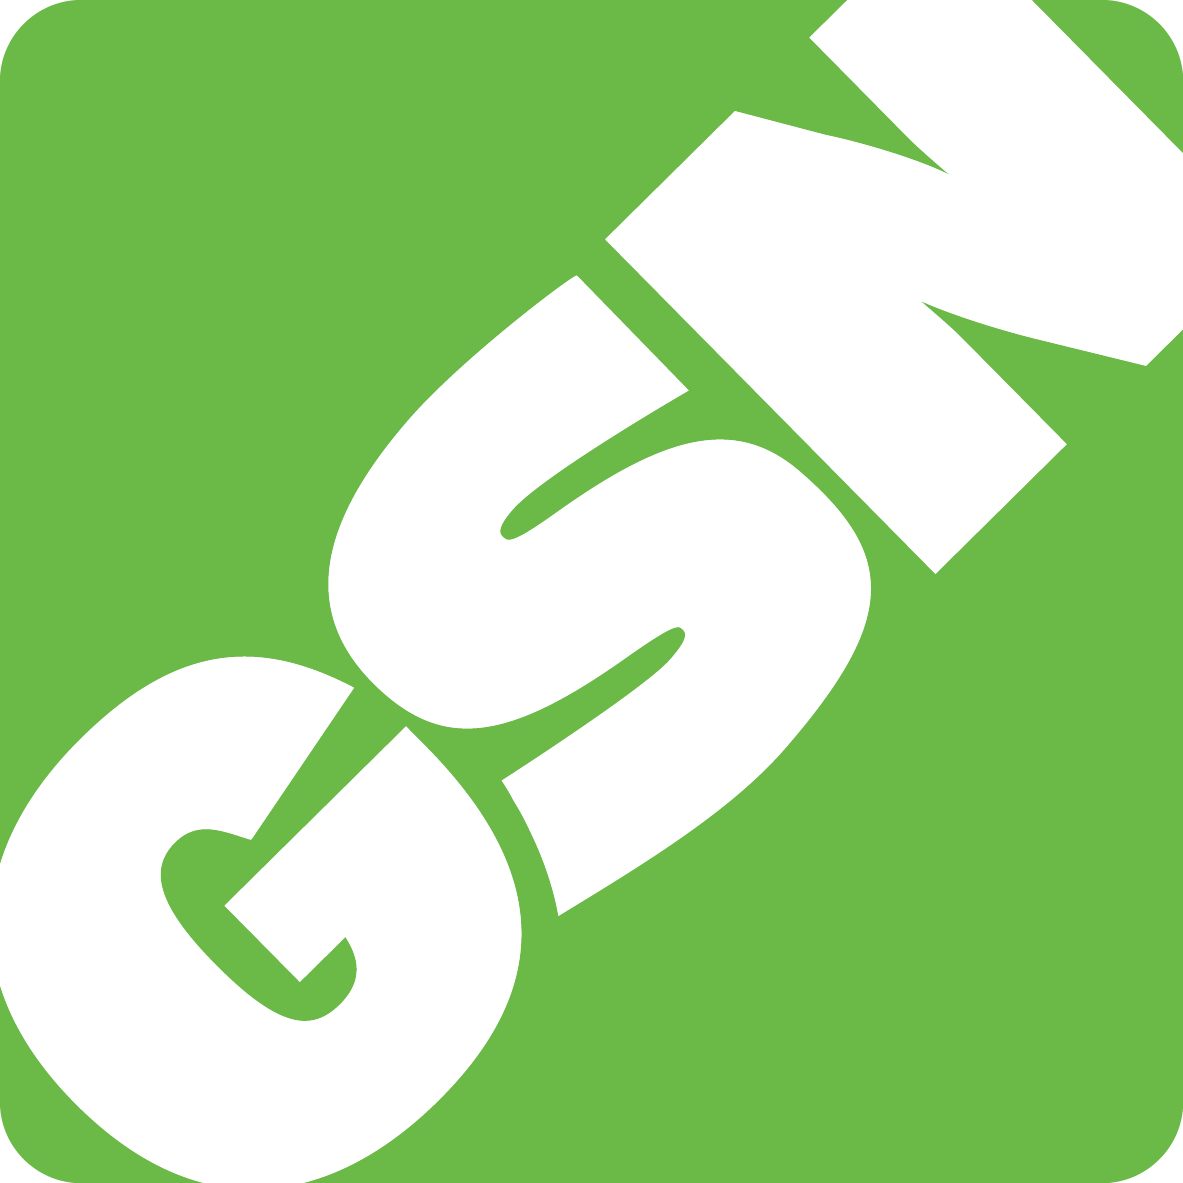 Channel logo for GSN - Game Show Network